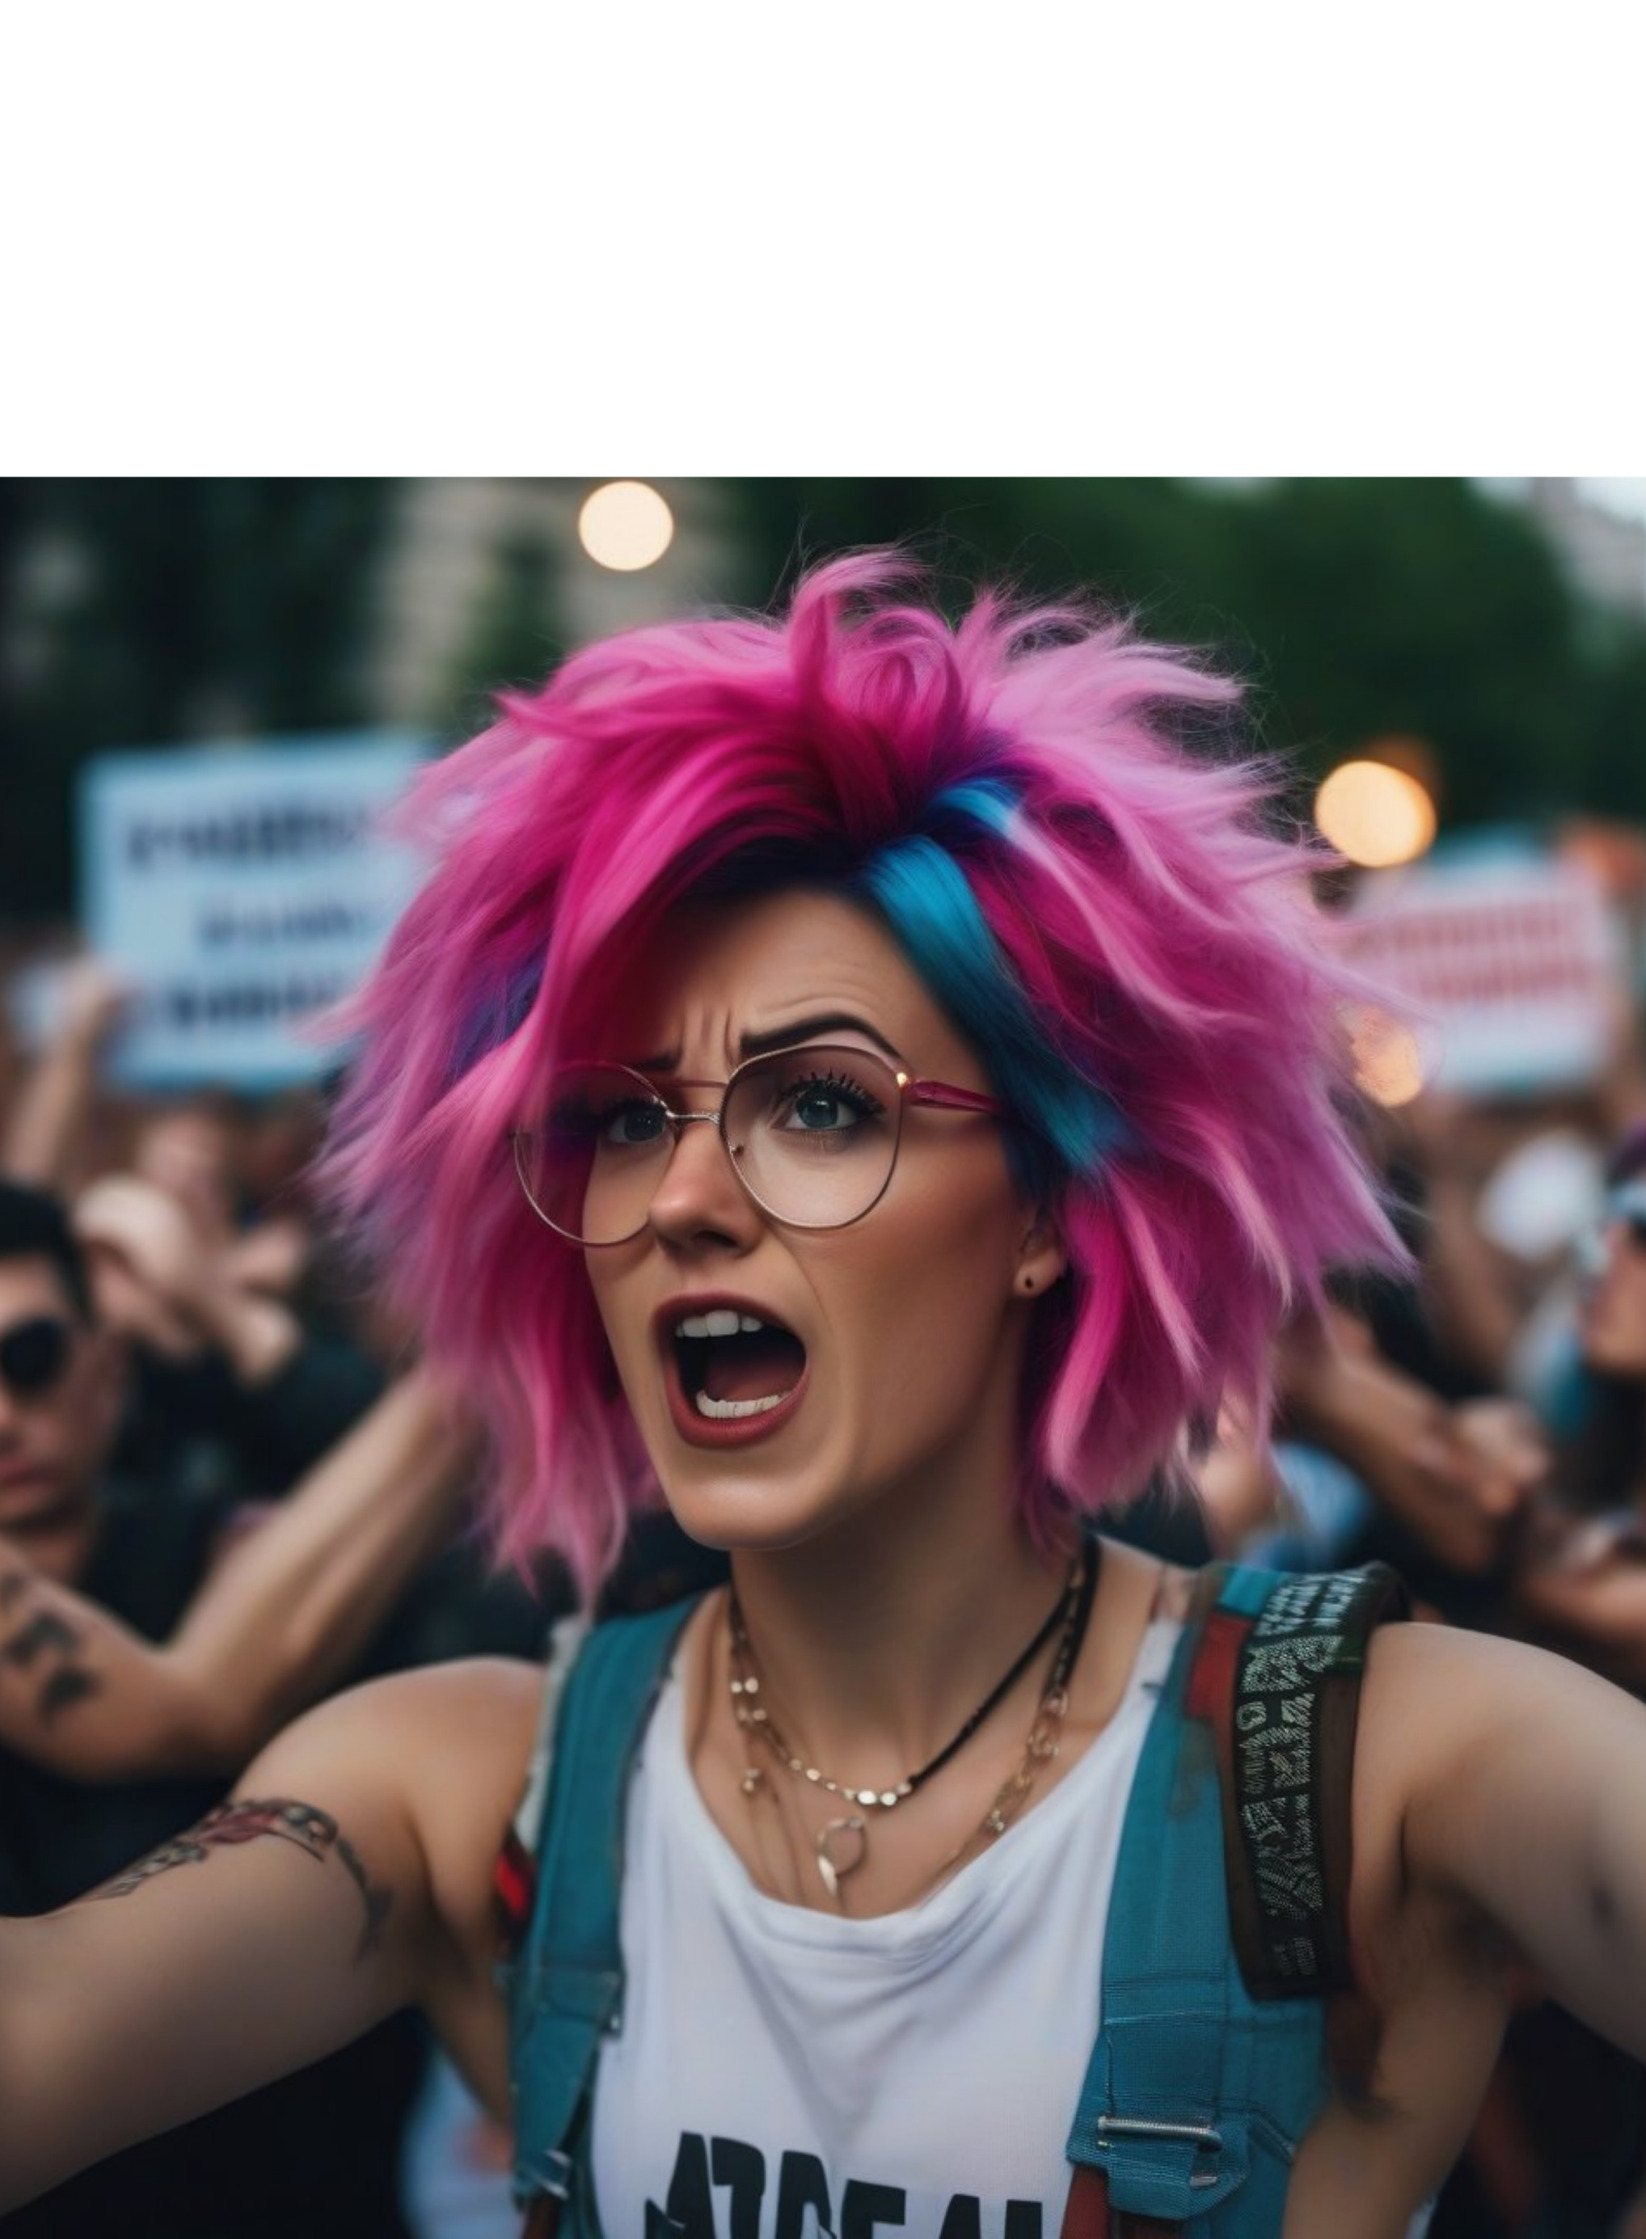 High Quality Biased Feminist Protester Blank Meme Template